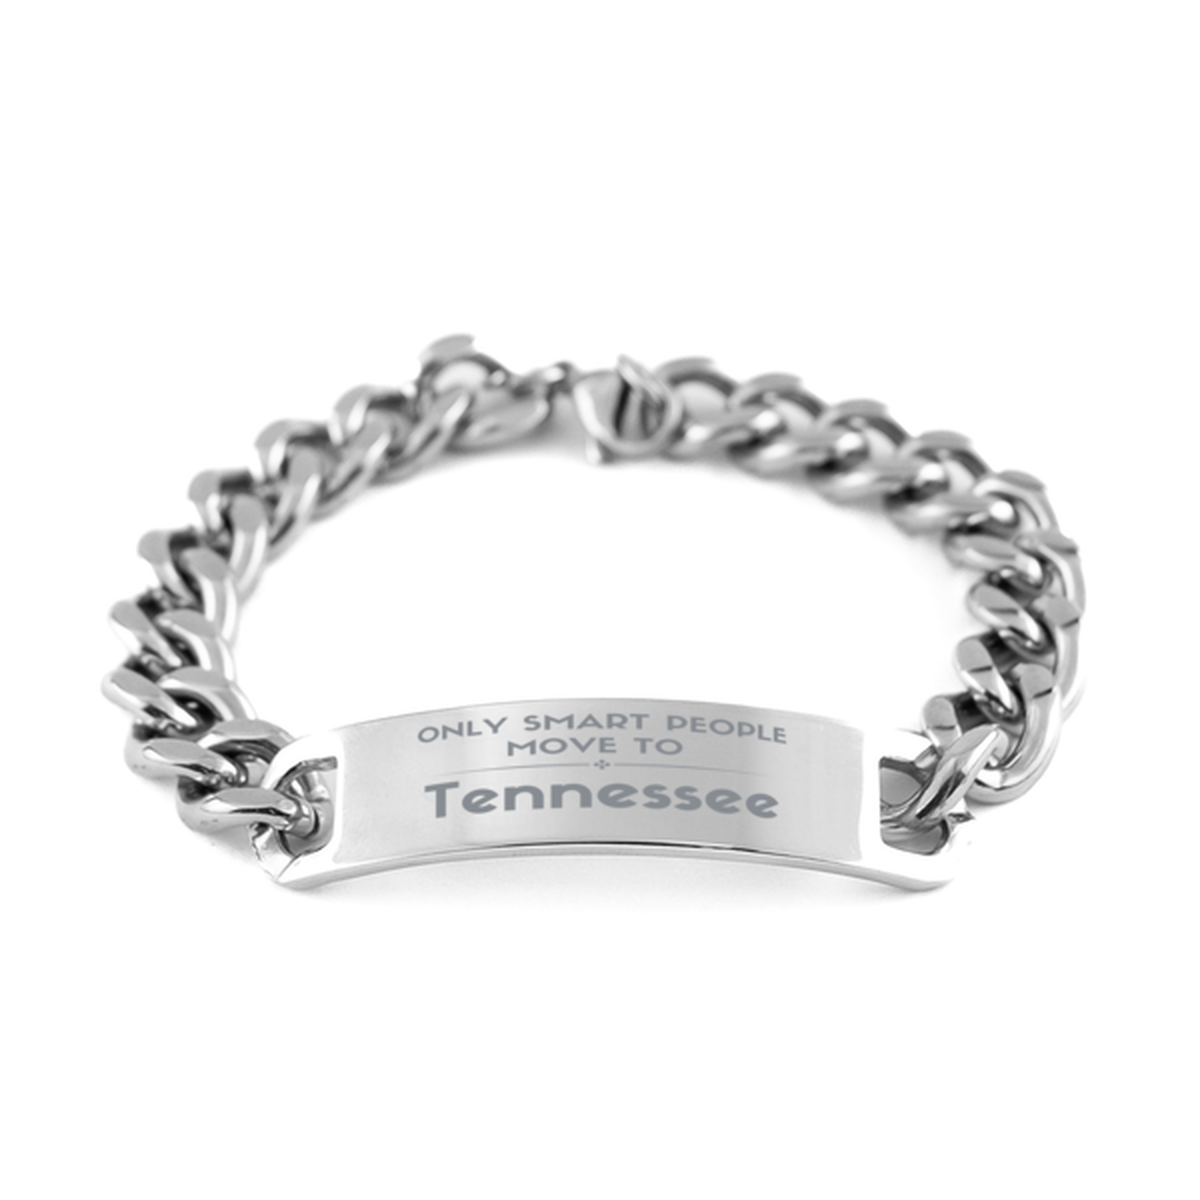 Only smart people move to Tennessee Cuban Chain Stainless Steel Bracelet, Gag Gifts For Tennessee, Move to Tennessee Gifts for Friends Coworker Funny Saying Quote